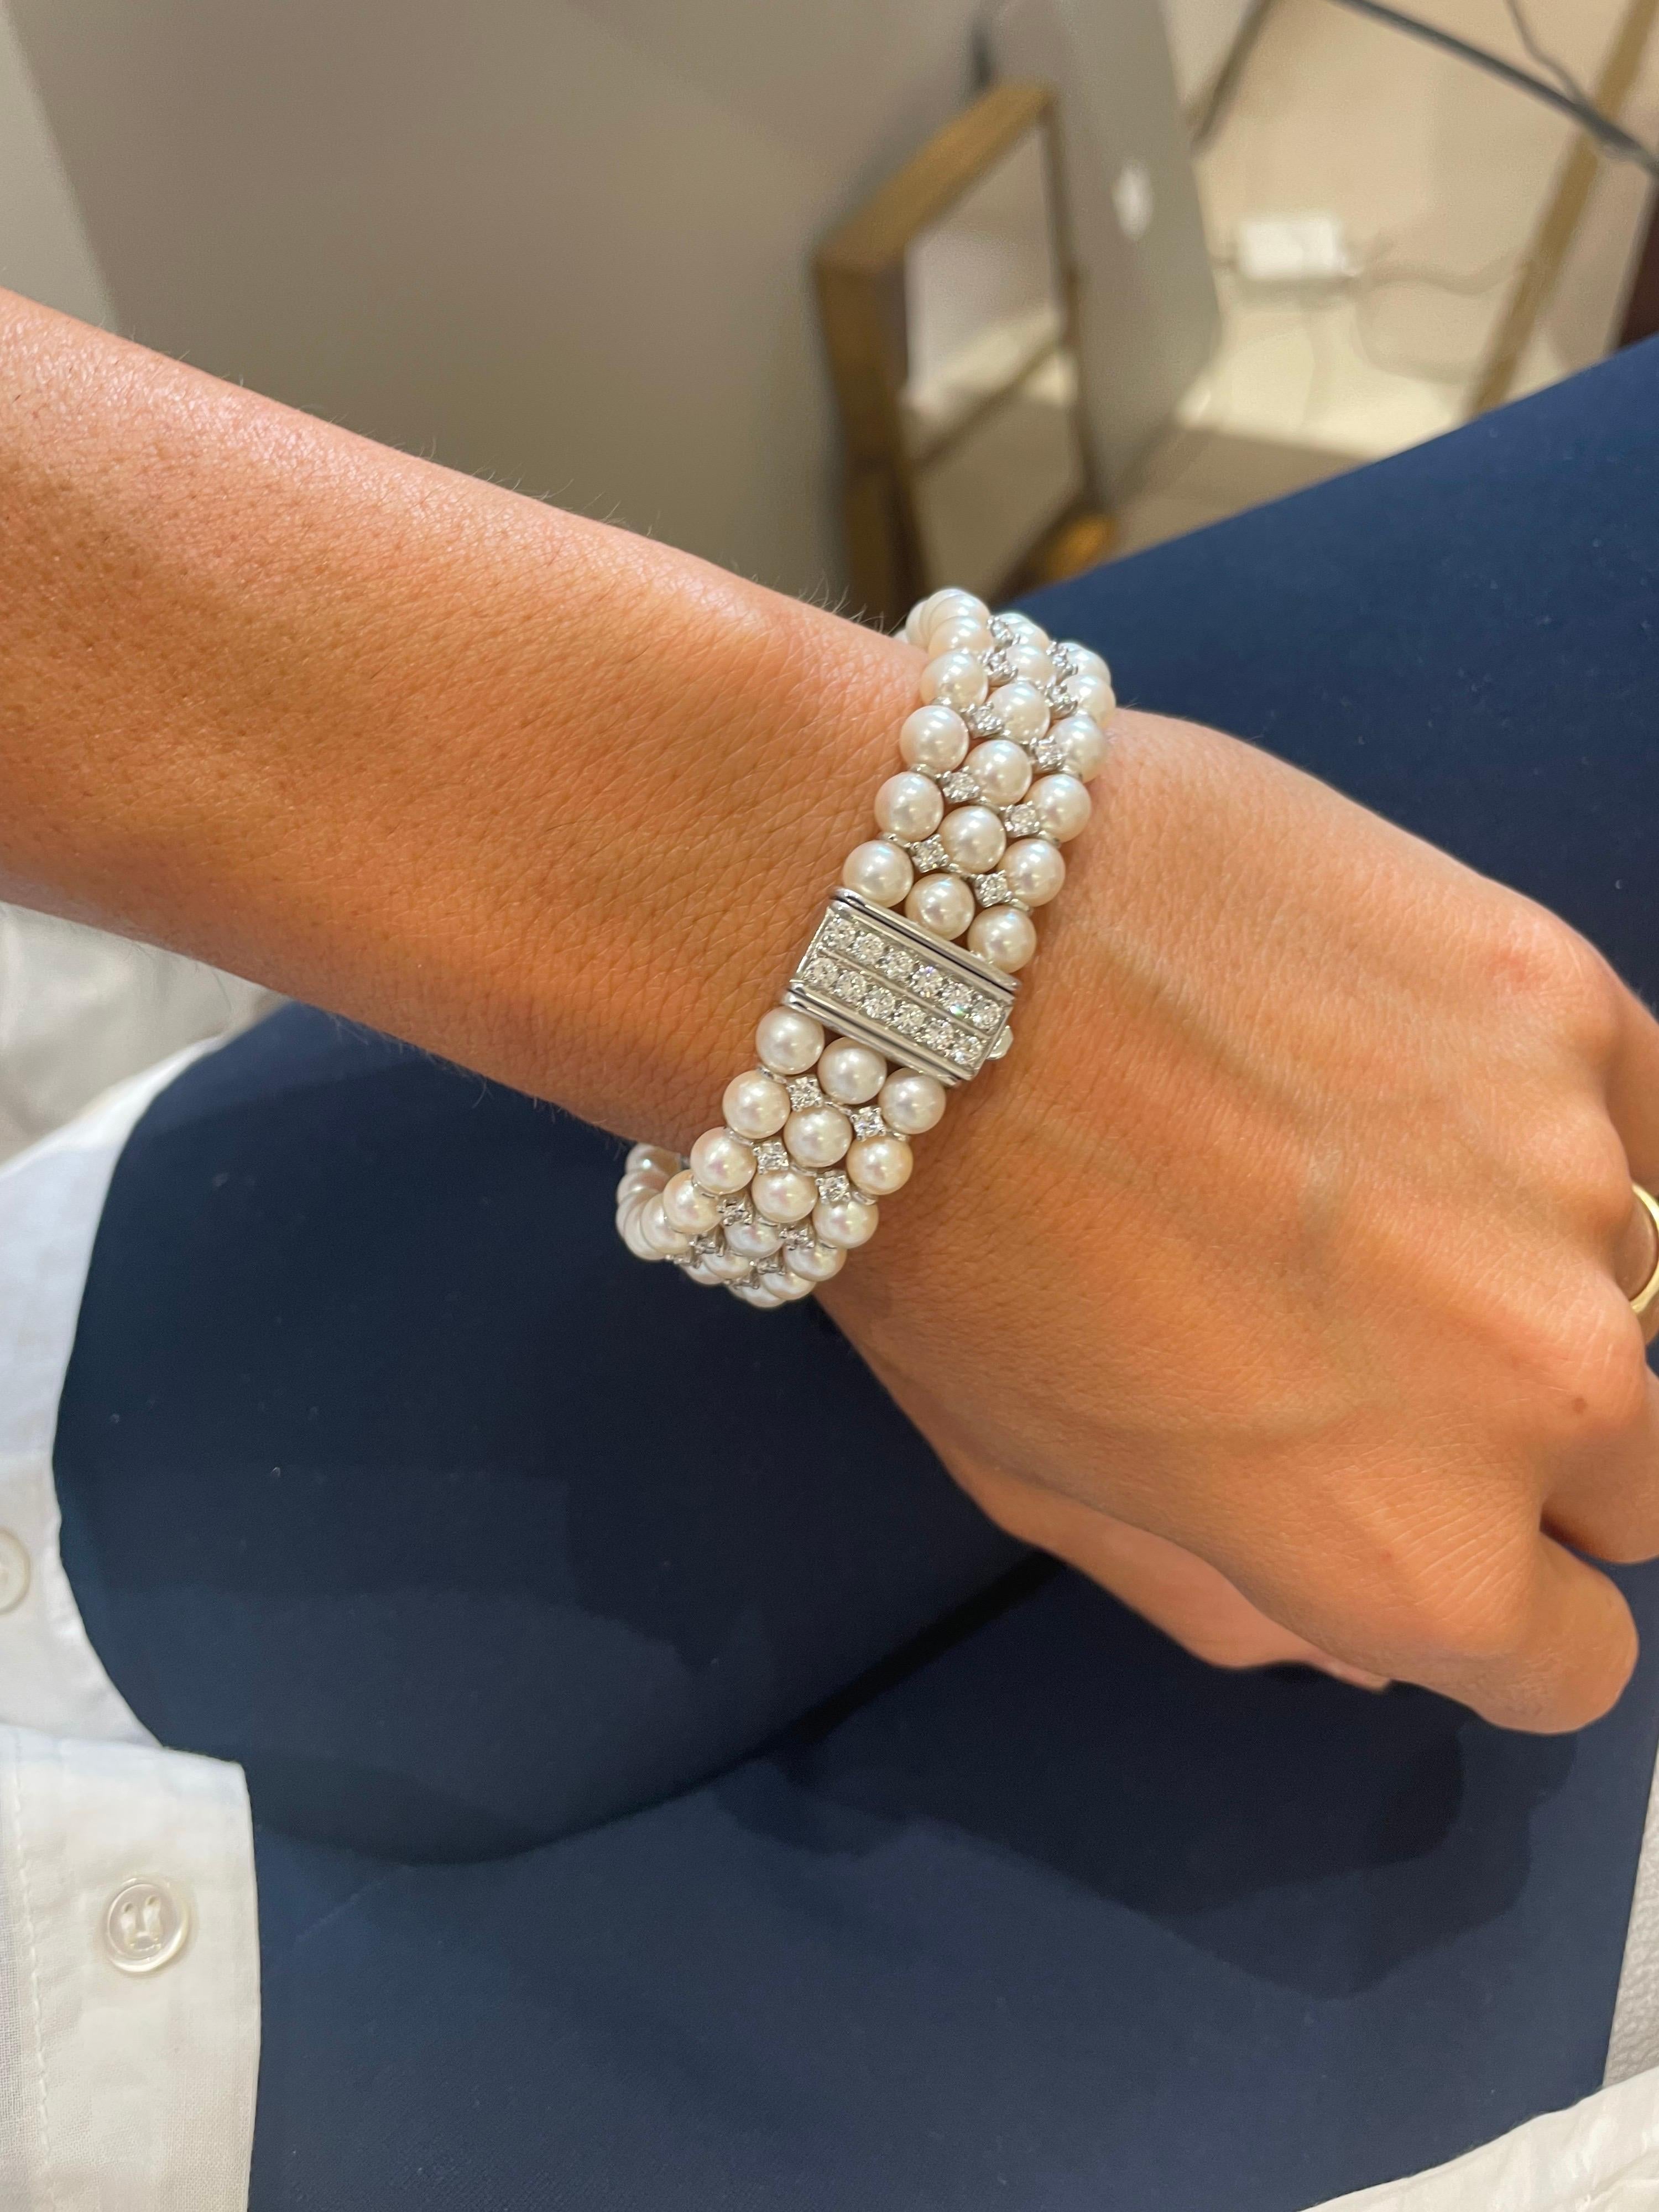 This gorgeous 18 karat white gold bracelet is designed with 3 rows of 5mm cultured pearls. The pearls alternate with round brilliant diamonds that have been prong set. The clasp is set with 12 round brilliant diamonds leading to continuous sparkle